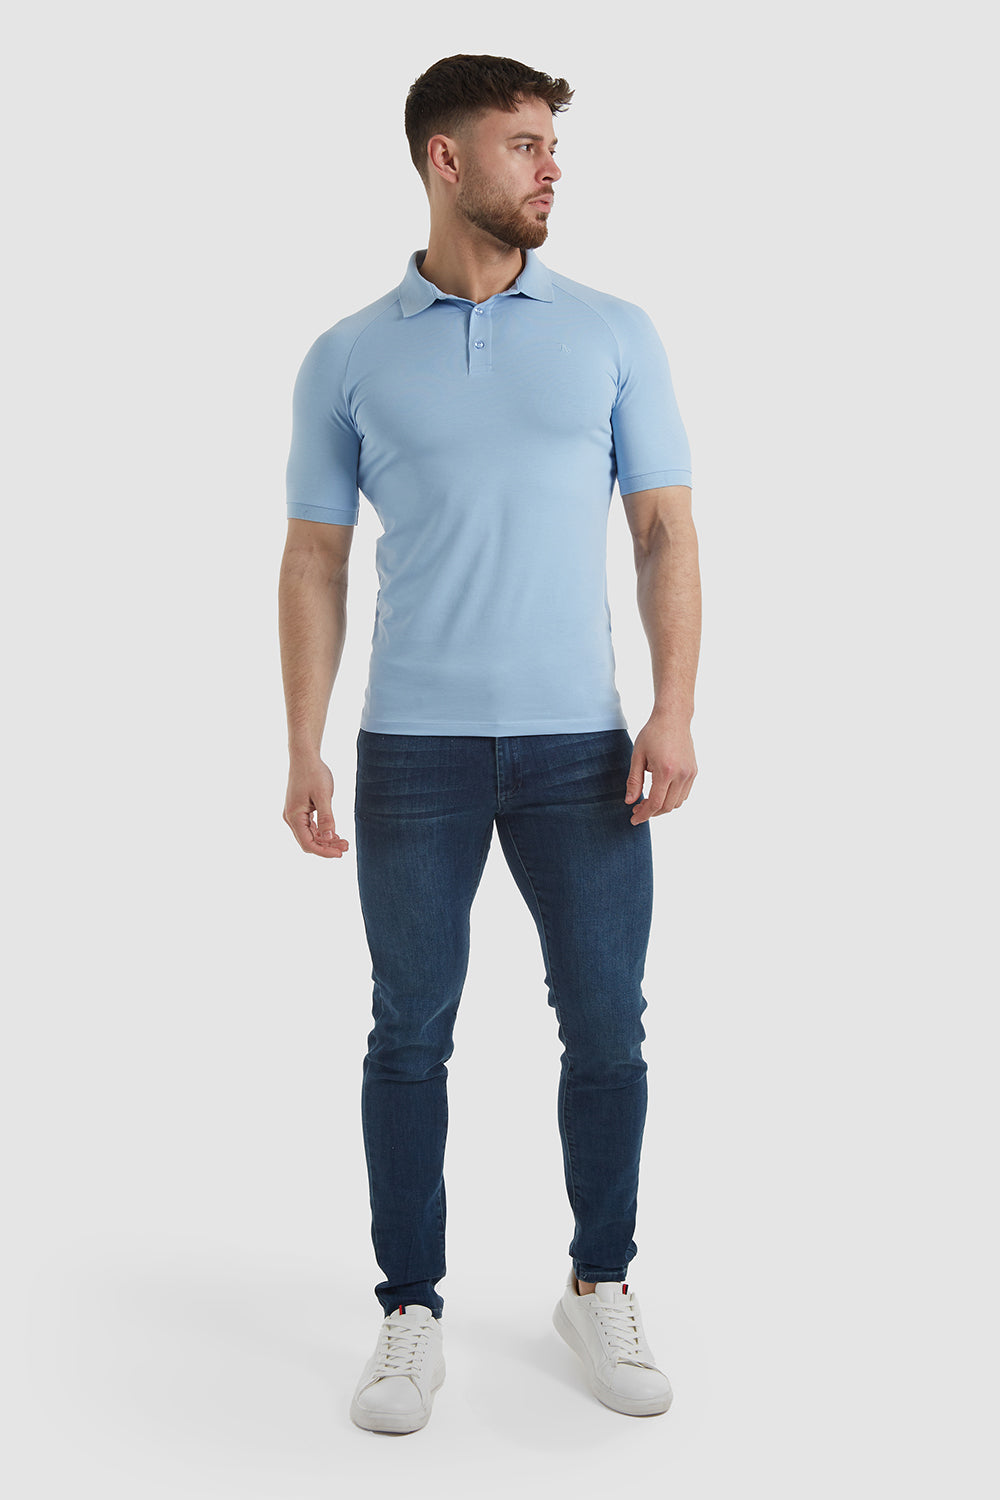 Muscle Fit Polo Shirt in Soft Blue - TAILORED ATHLETE - ROW